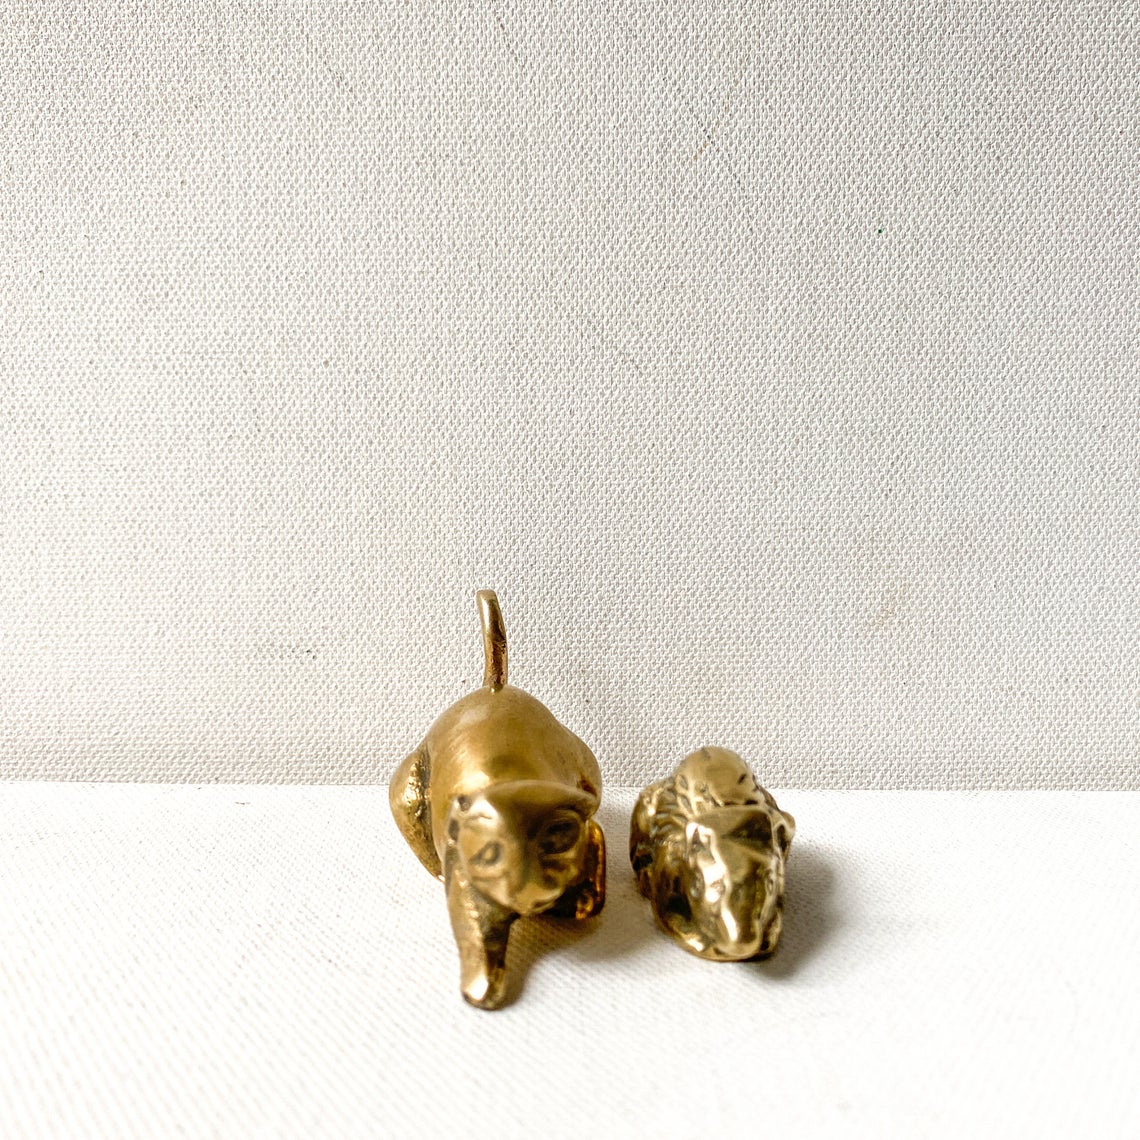 Small Vintage Brass Cat and Mouse Figurines